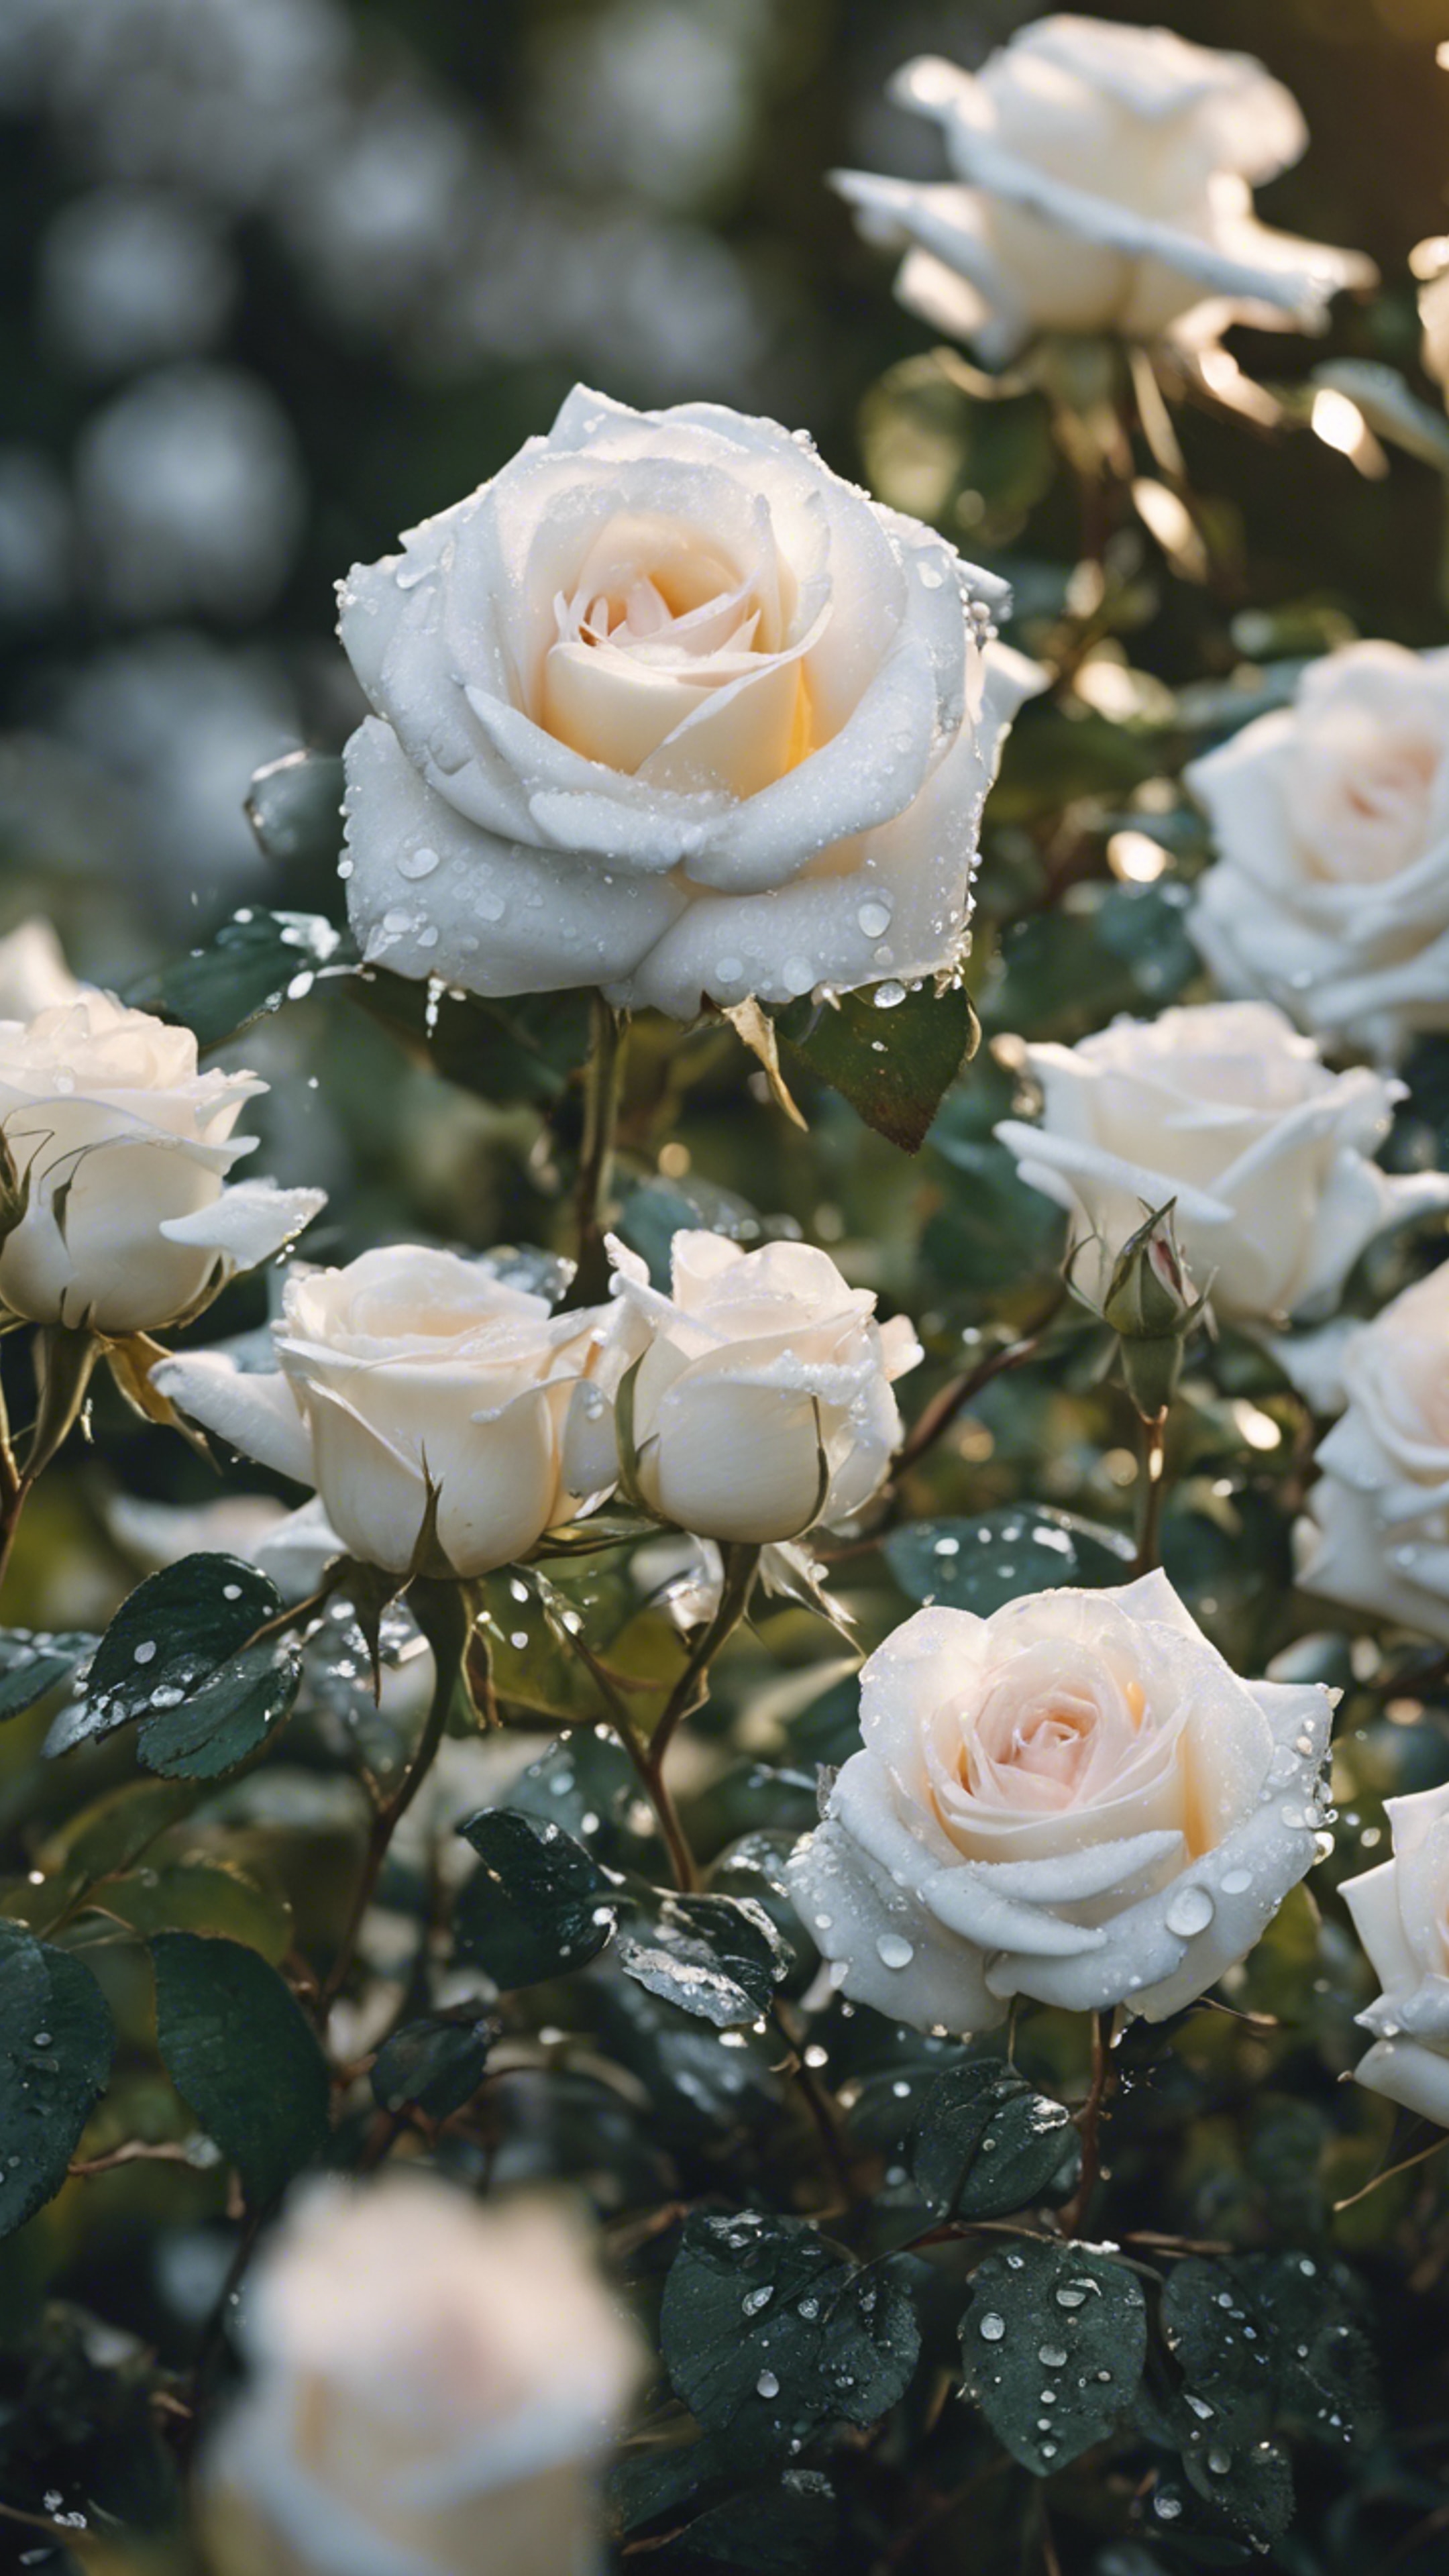 White roses covered in silver morning dew in a lush rose garden. Tapet[67c2c5bc62874412a2b6]